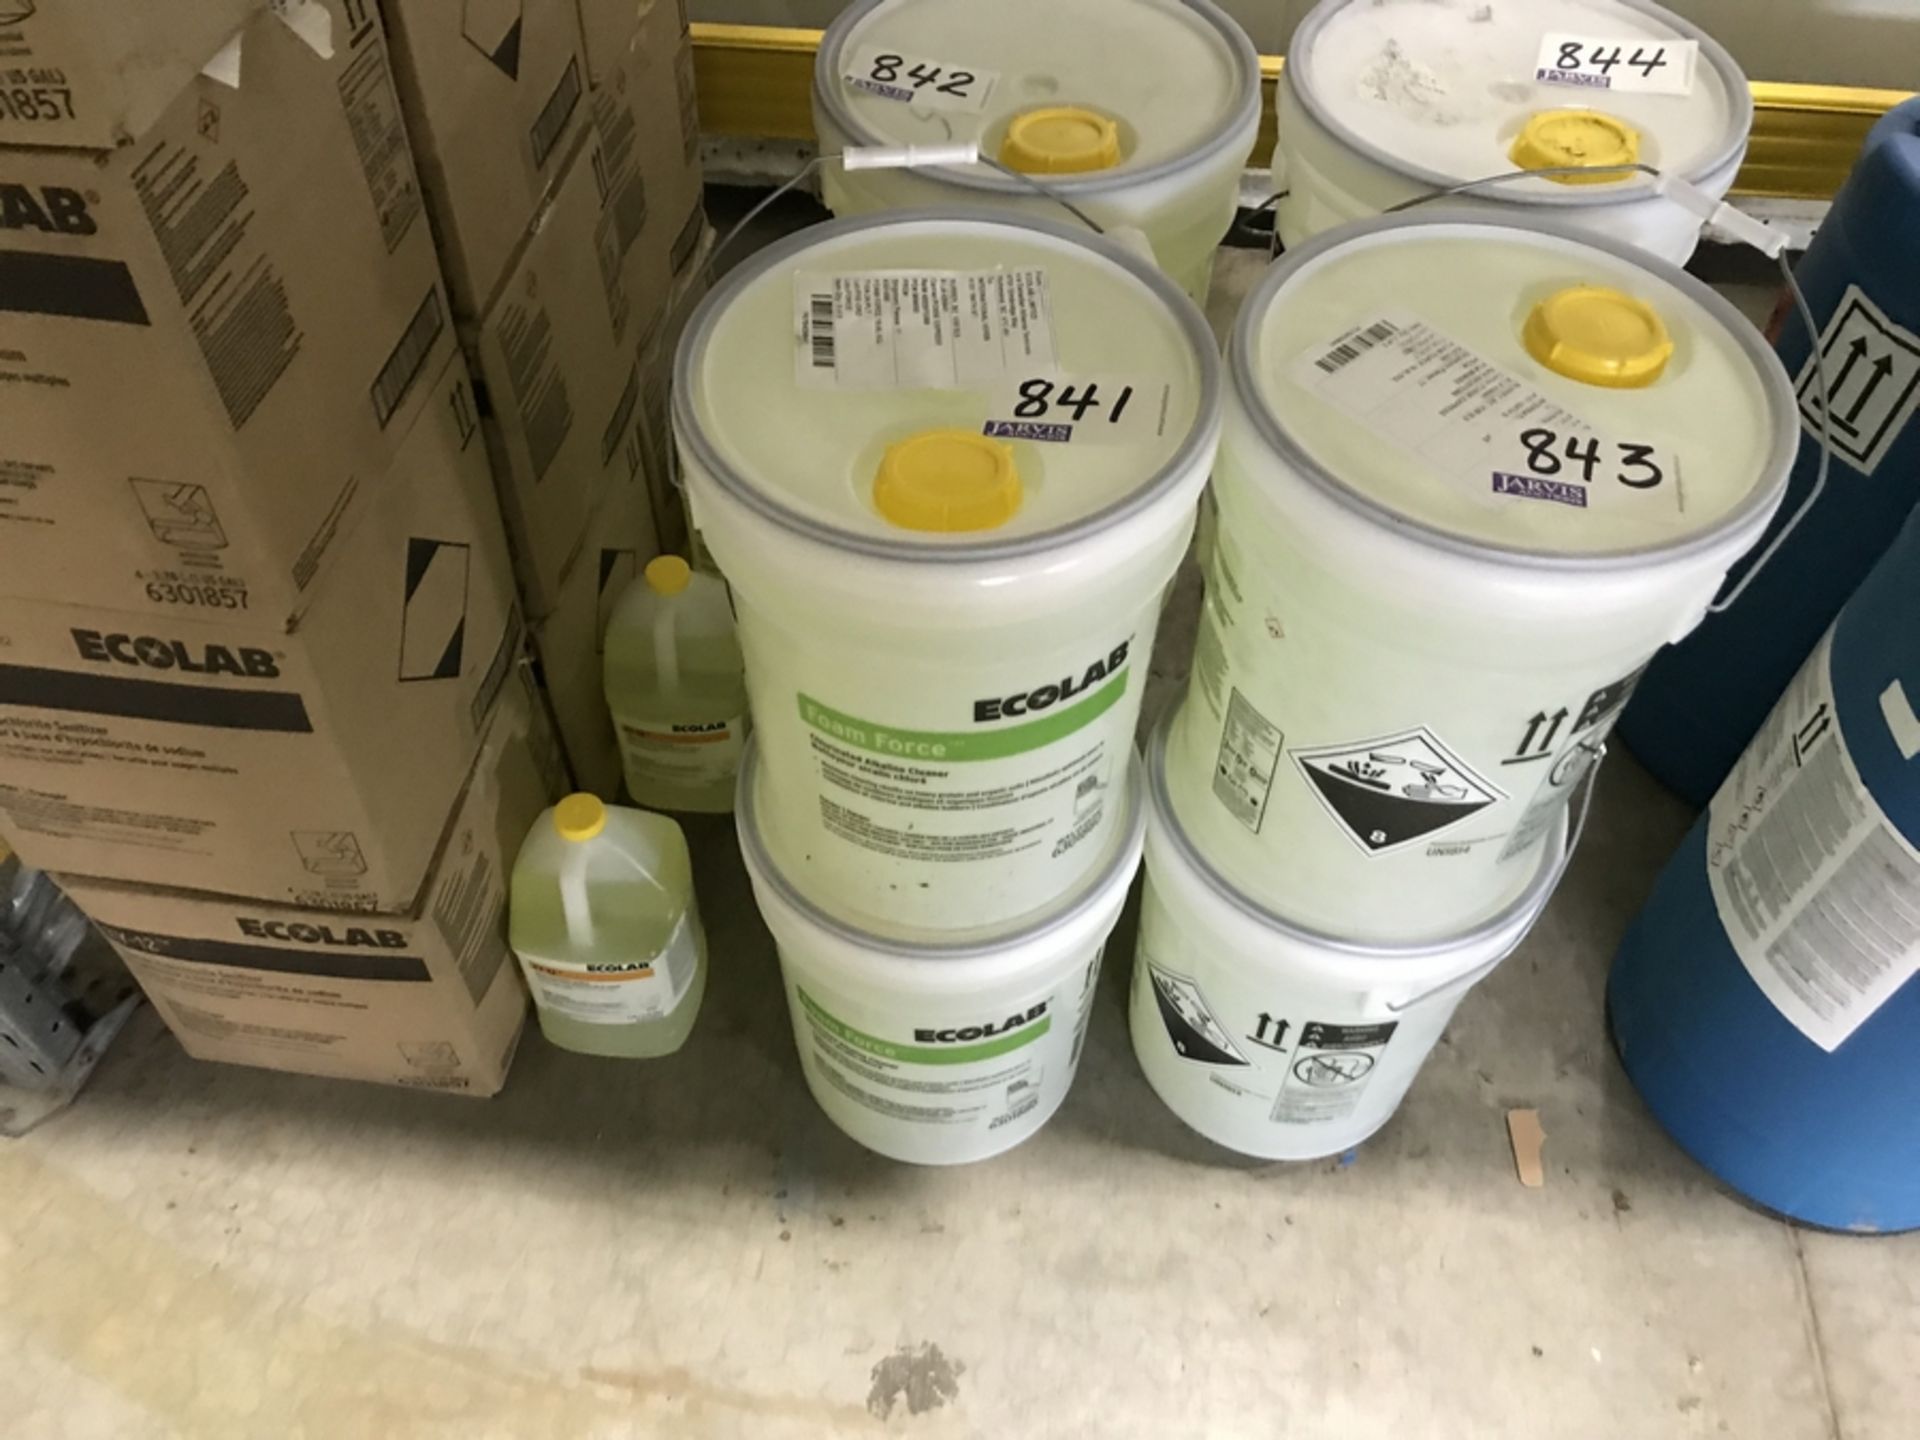 2 PAILS OF FOAM FORCE CLEANER